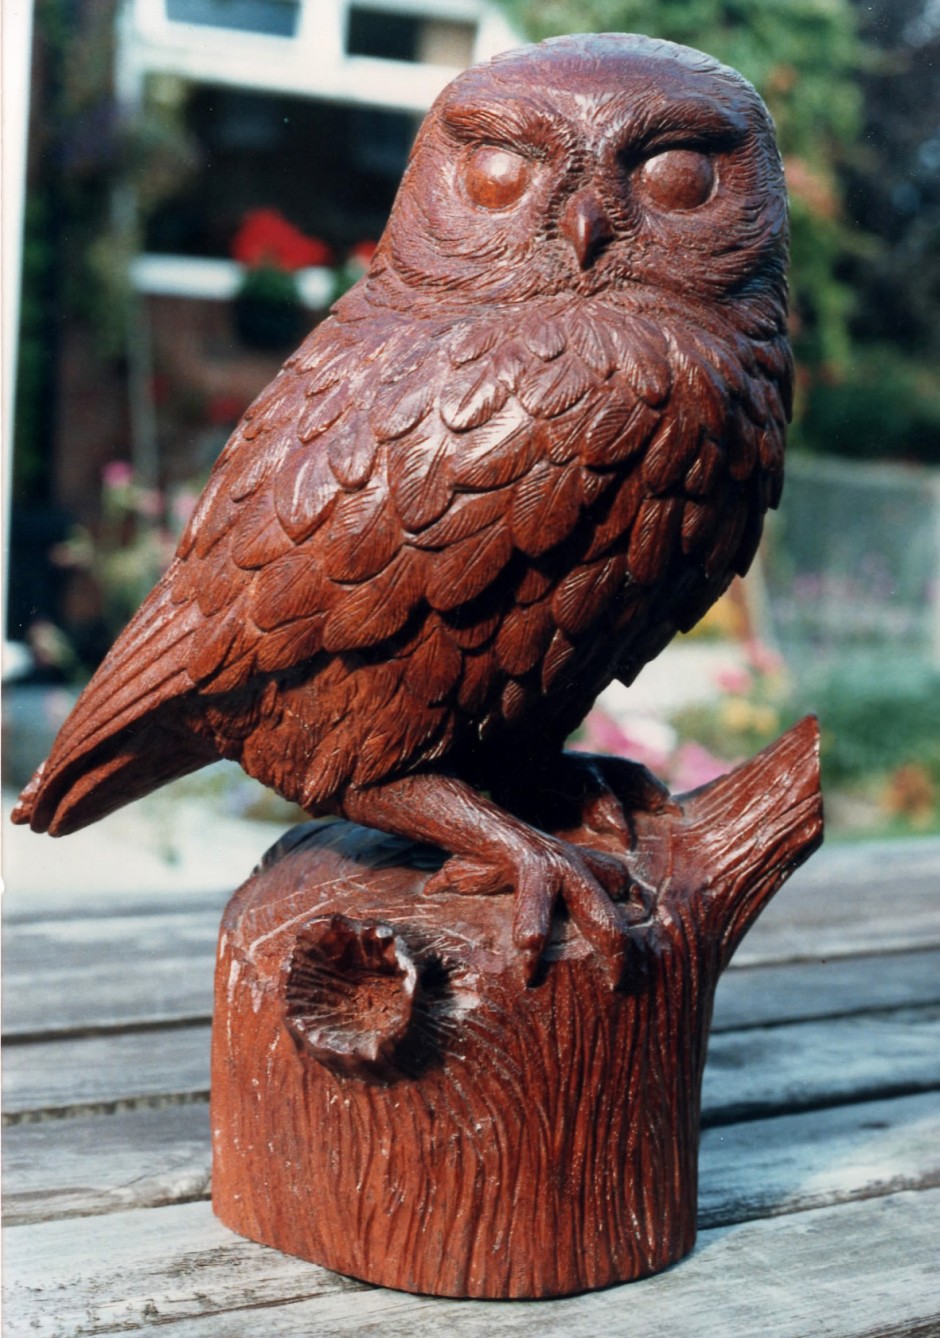 Little Owl In Mahogany - wooden owl, brown owl, wood carved owl, bees wax